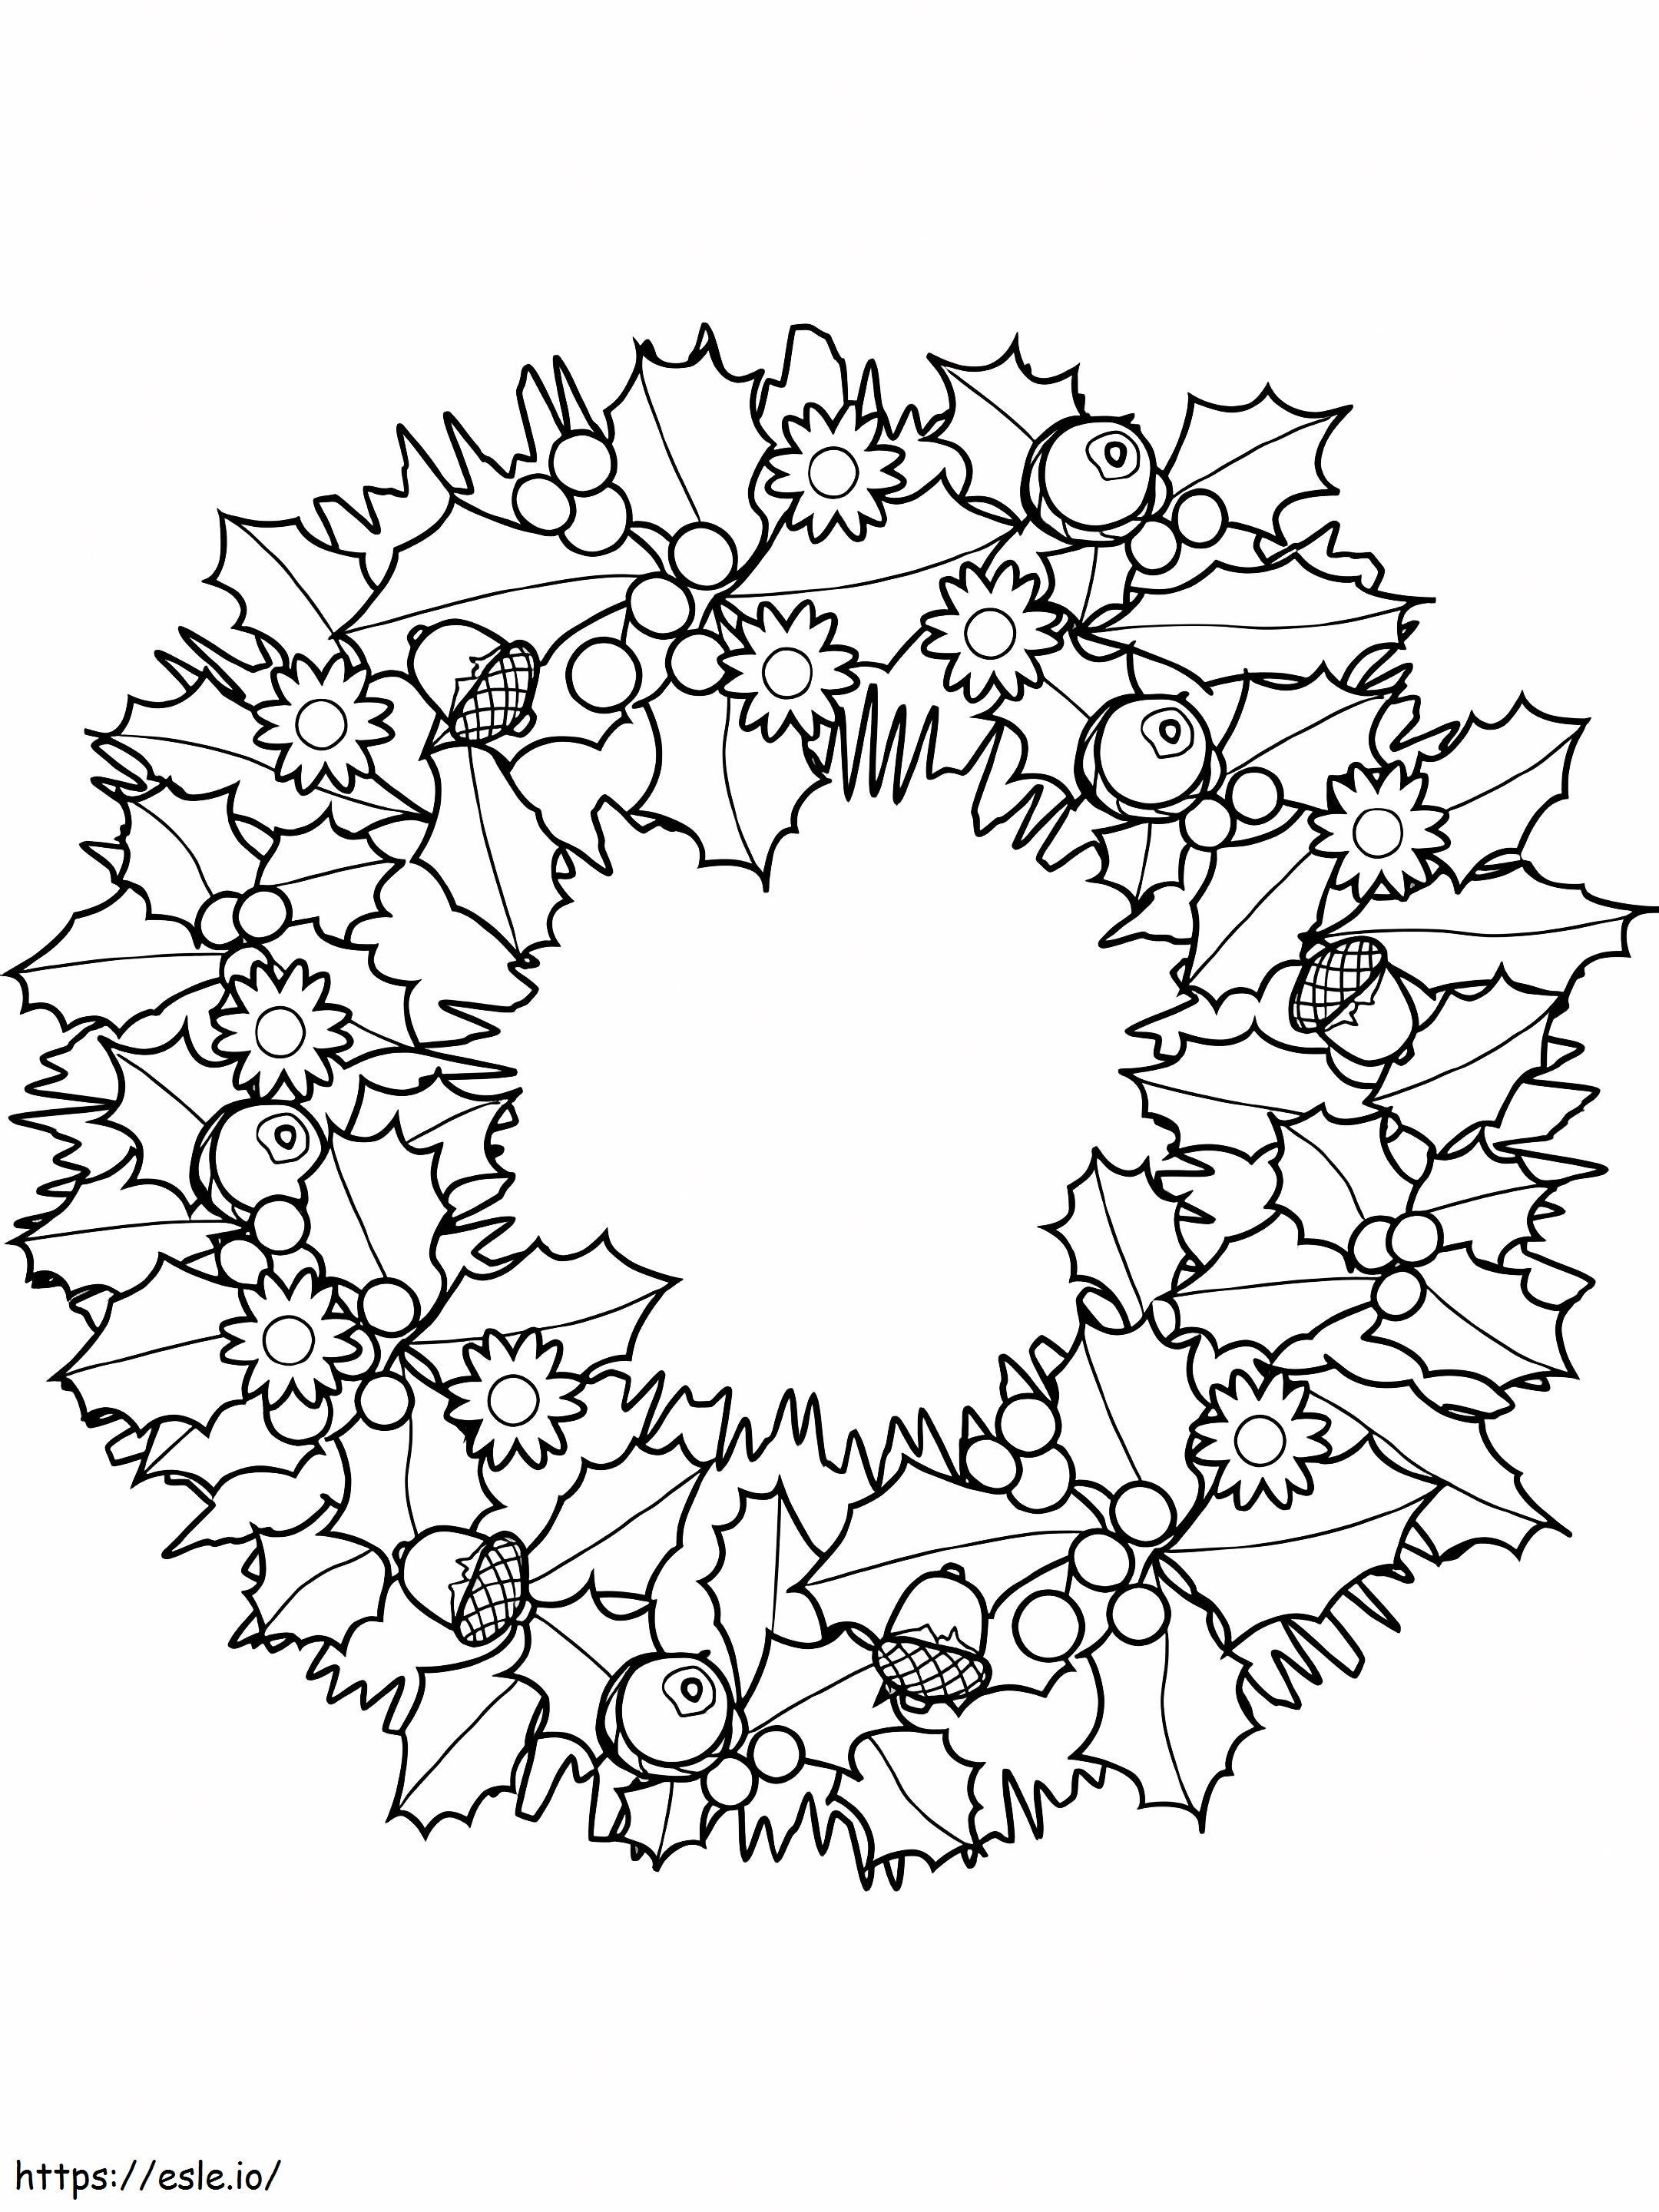 Wreath 2 coloring page